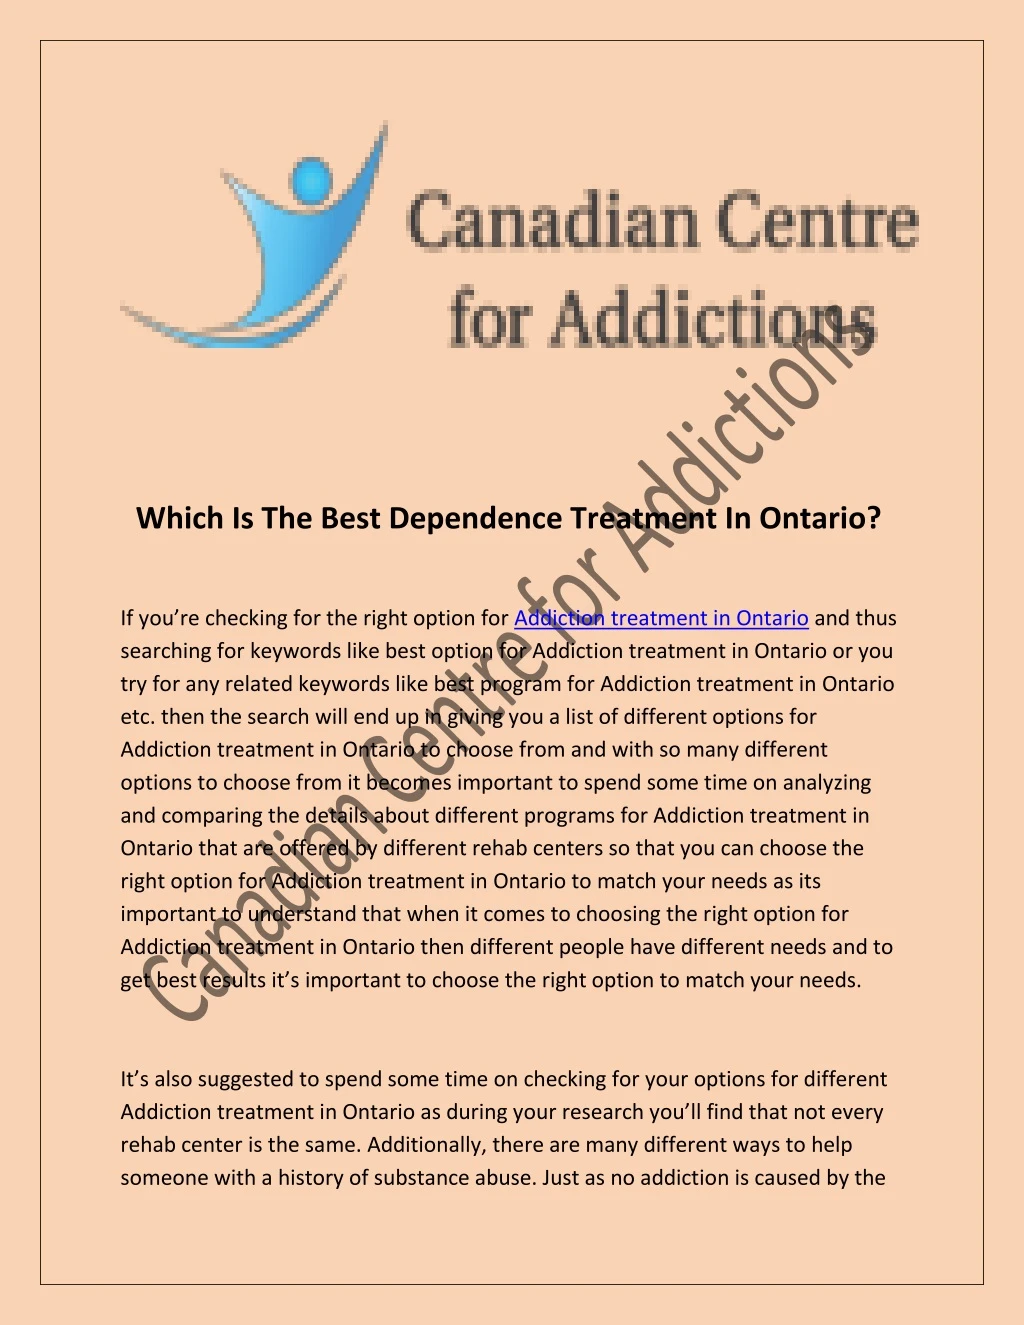 which is the best dependence treatment in ontario